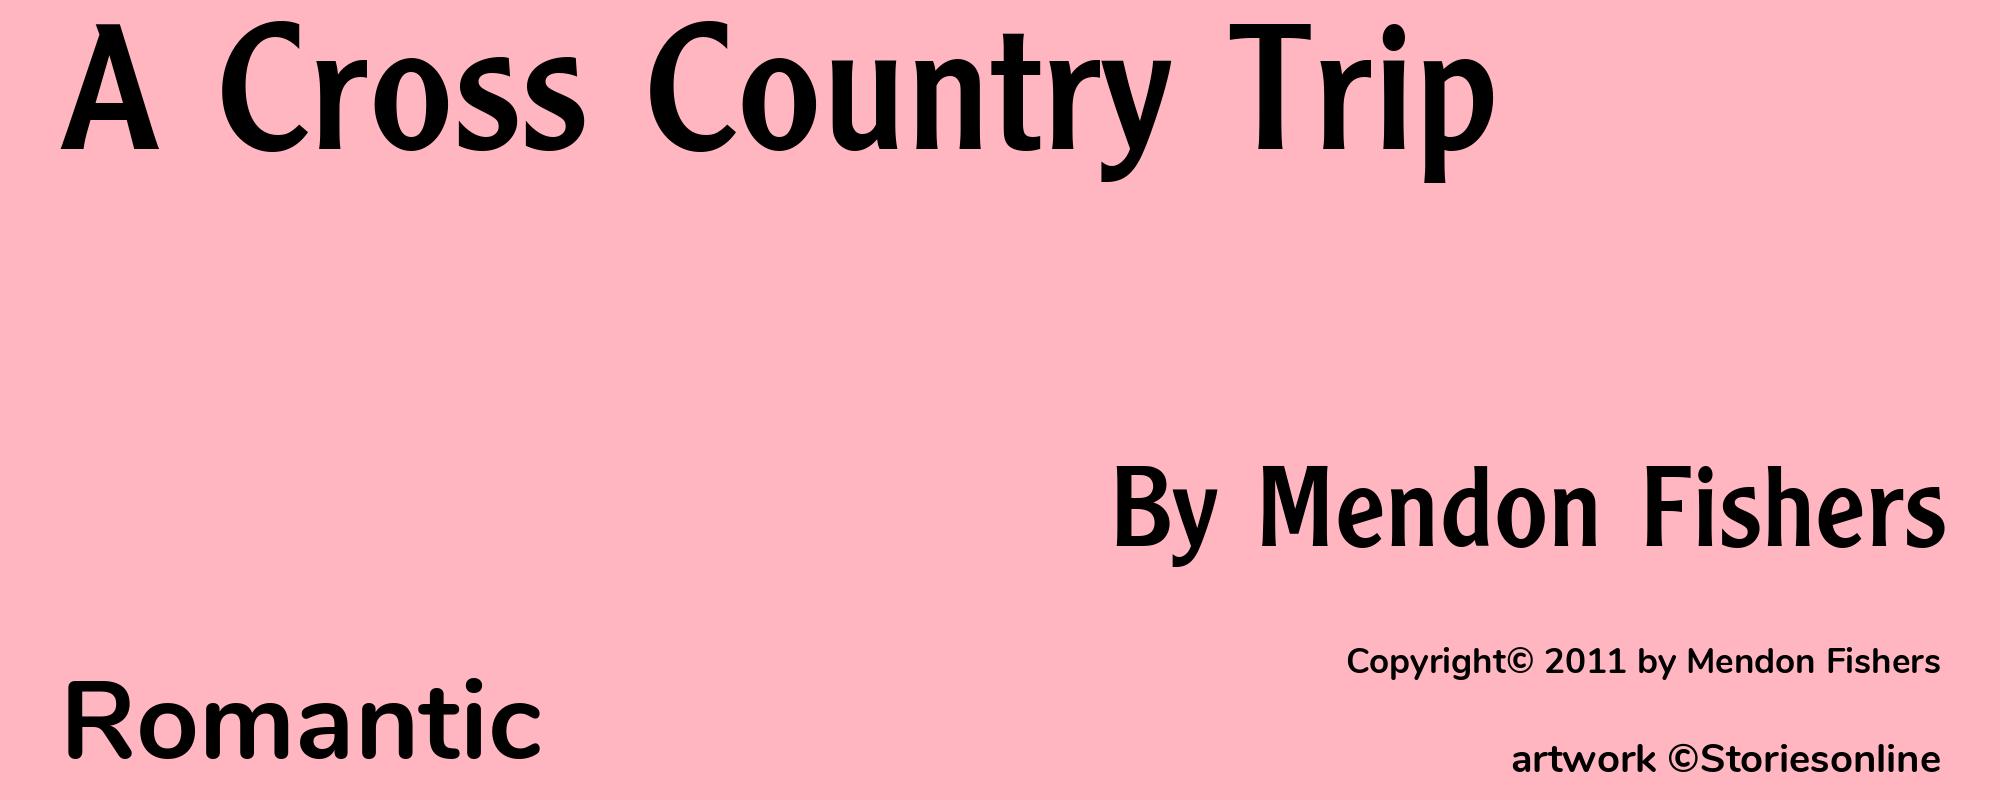 A Cross Country Trip - Cover